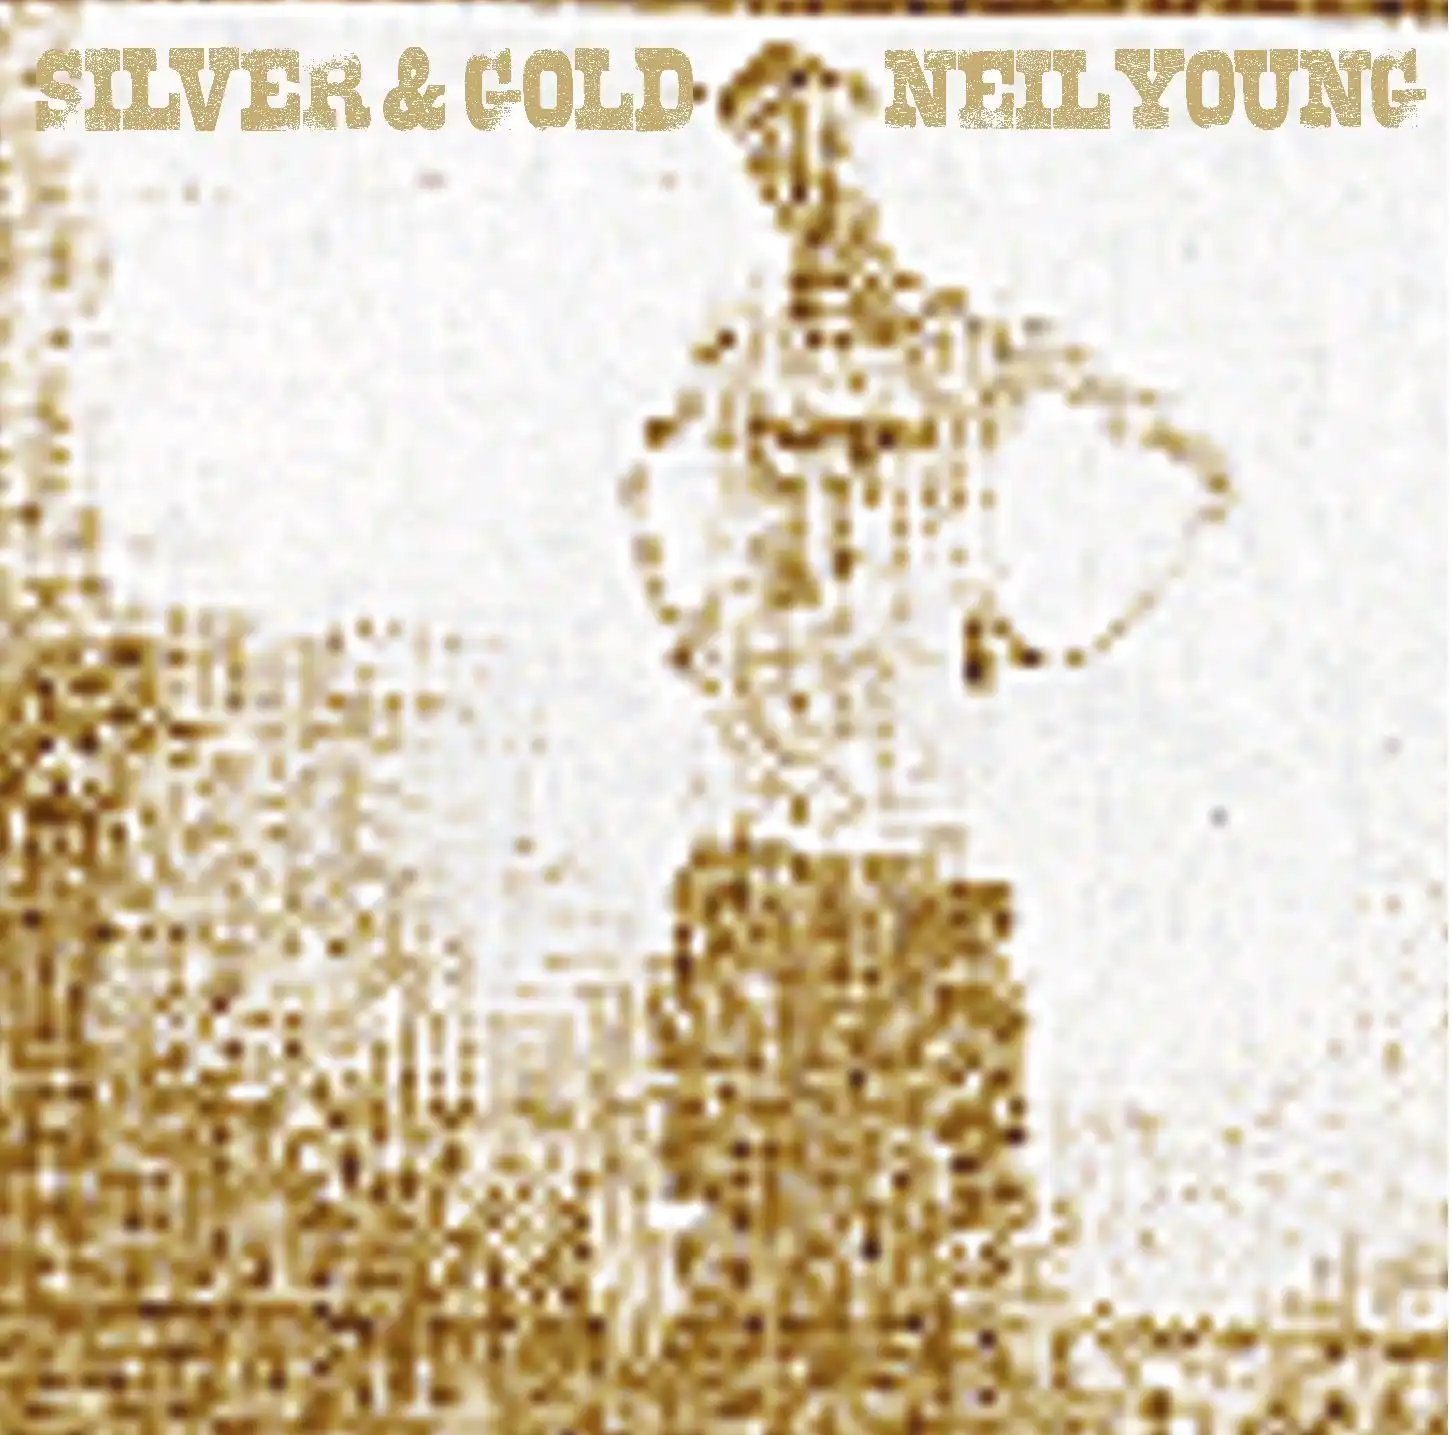 NEIL YOUNG ‎/ SILVER & GOLD 